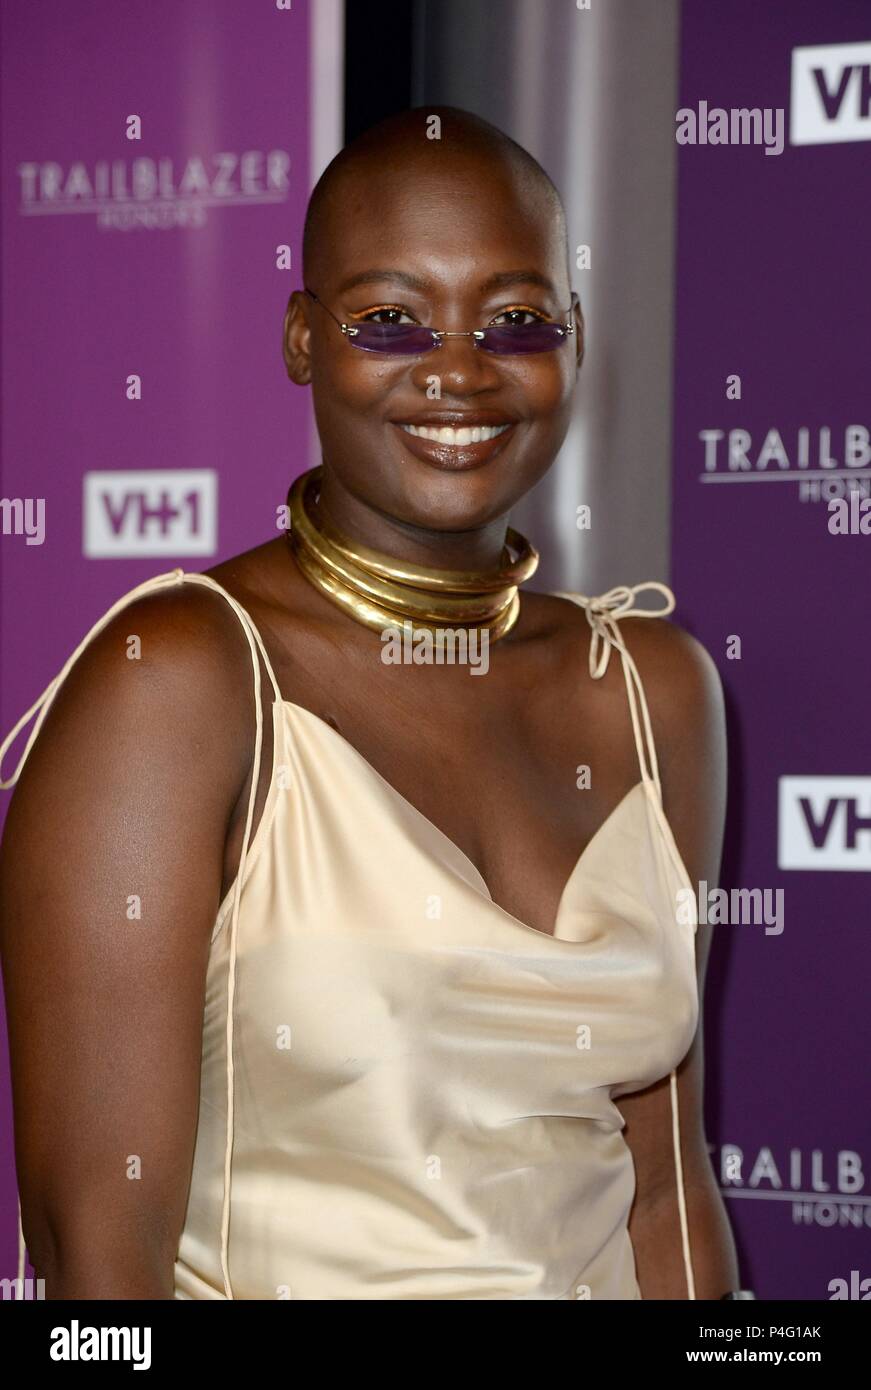 https://c8.alamy.com/comp/P4G1AK/new-york-ny-usa-21st-june-2018-mama-cox-at-arrivals-for-vh1s-trailblazer-honors-the-cathedral-of-st-john-the-divine-new-york-ny-june-21-2018-credit-kristin-callahaneverett-collectionalamy-live-news-P4G1AK.jpg